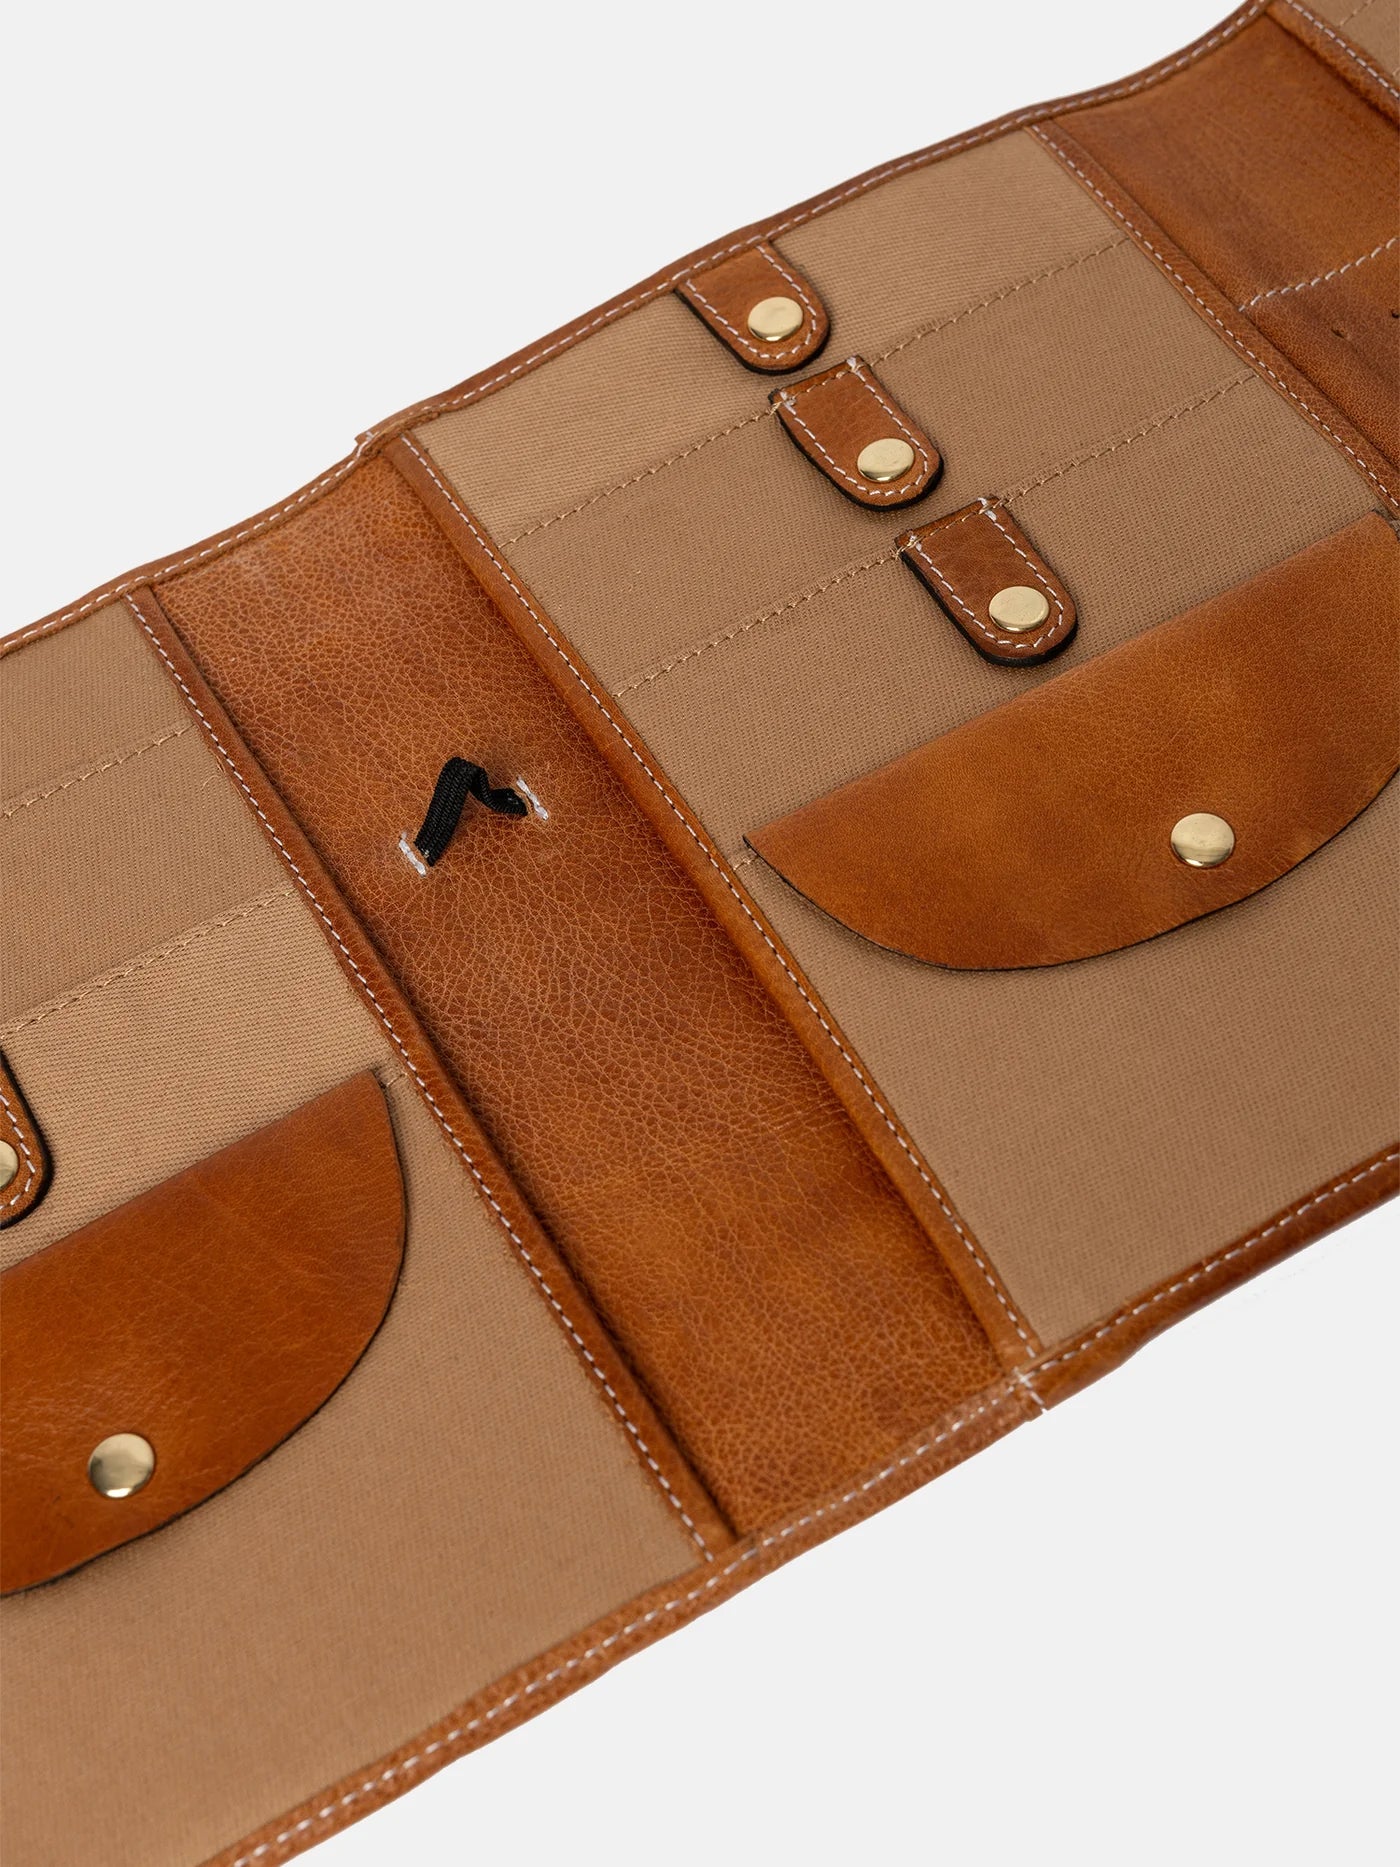 PREORDER DUE SEPTEMBER- Re:designed PROJECT -14 - Leather Needle Organiser